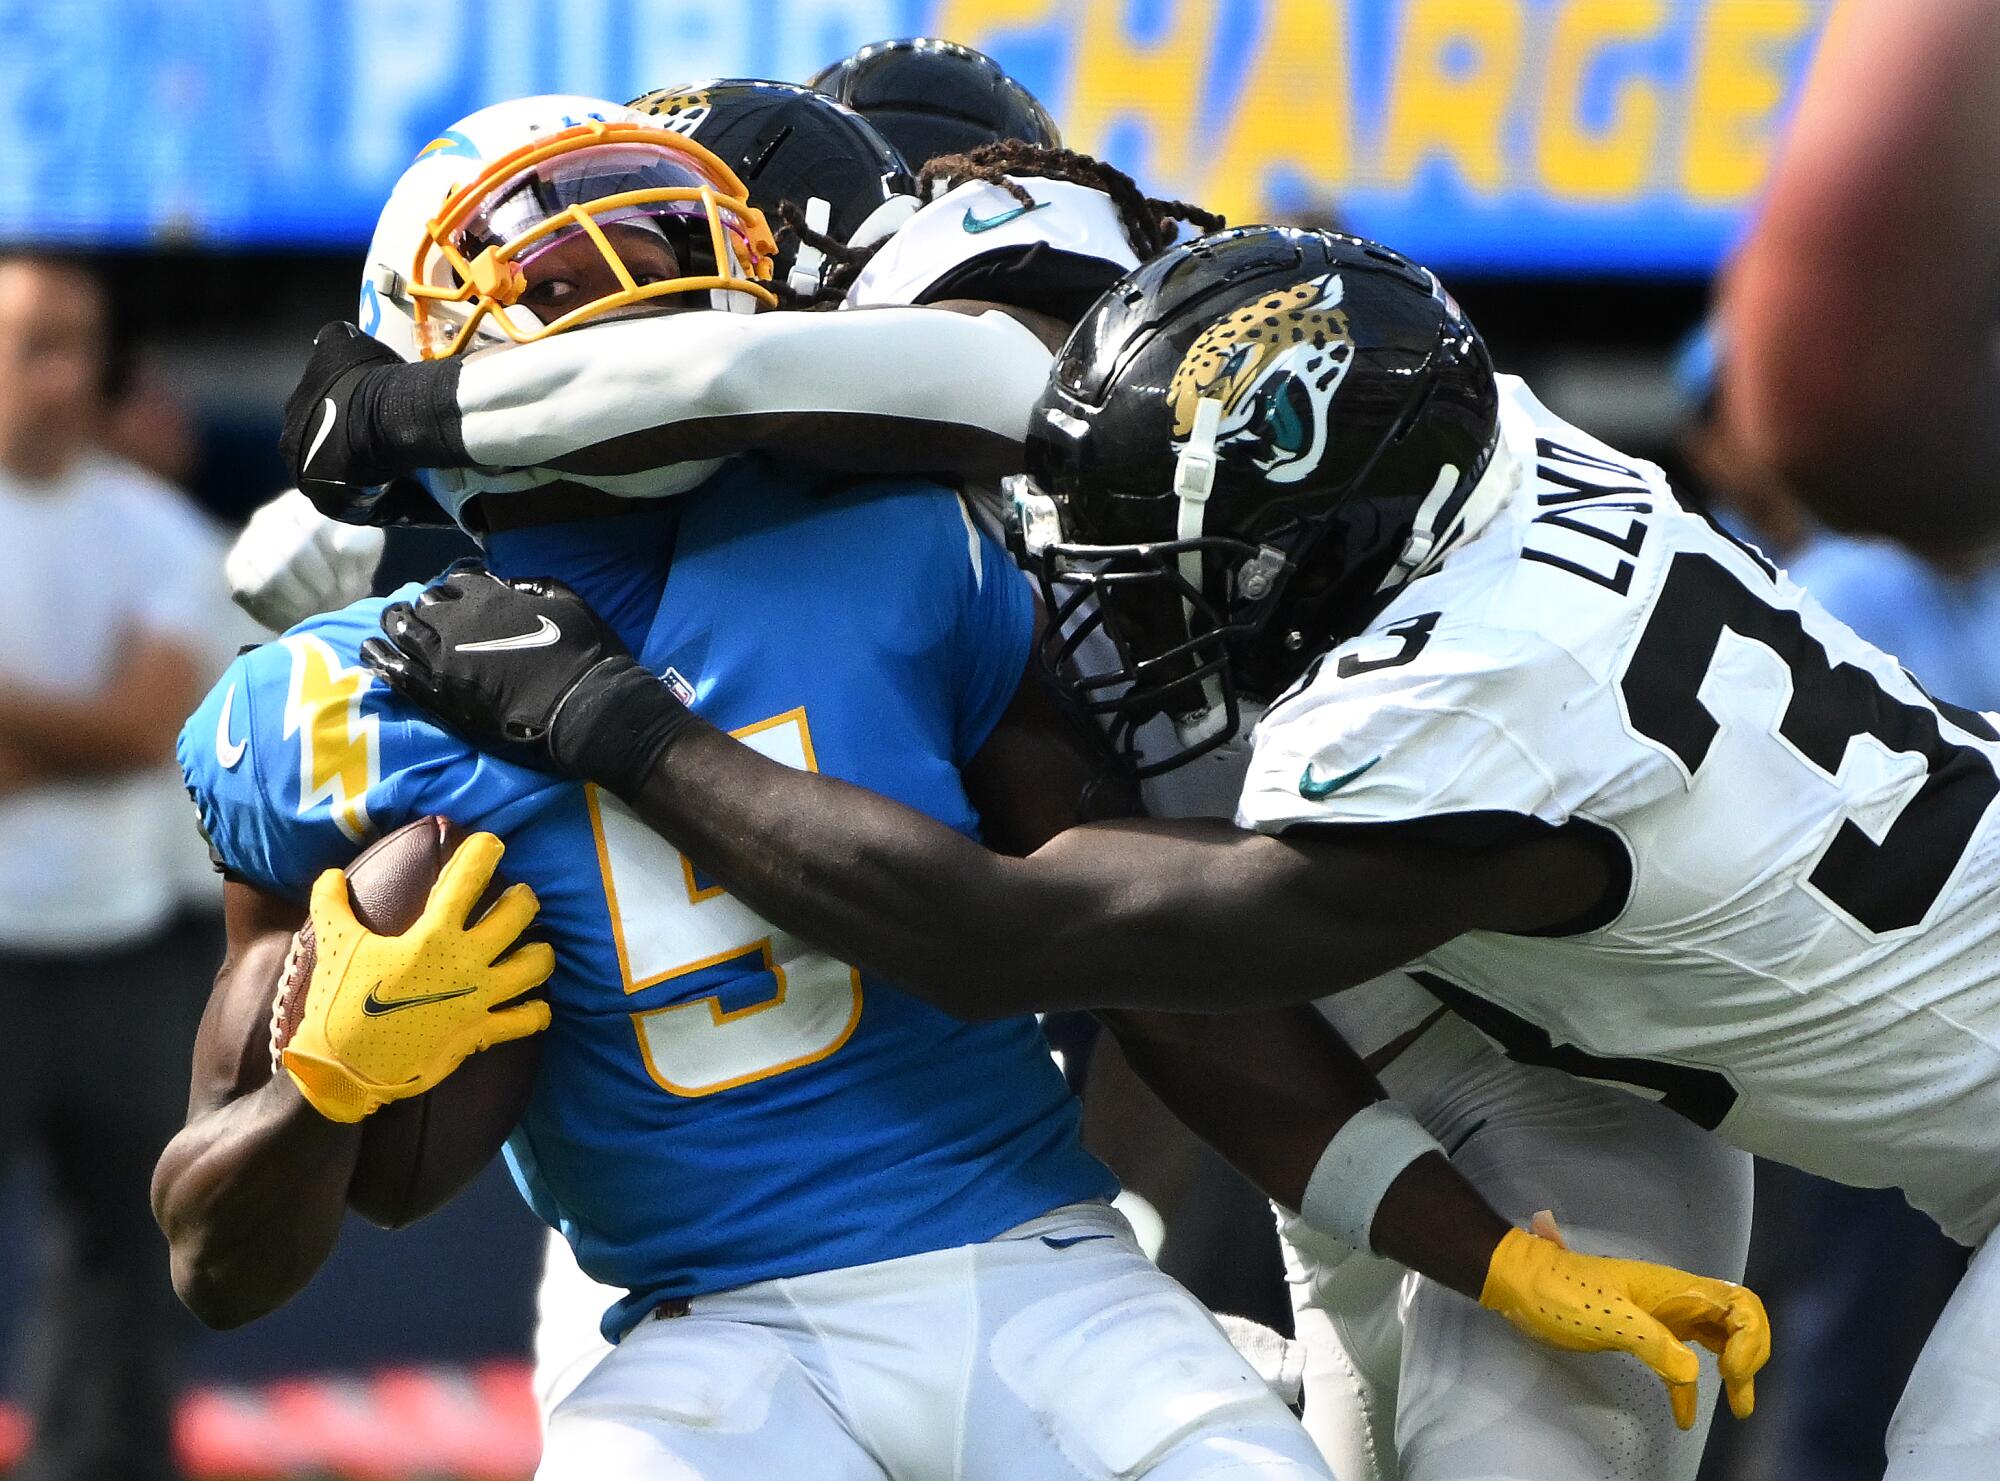 Chargers receiver Joshua Palmer is taken down.